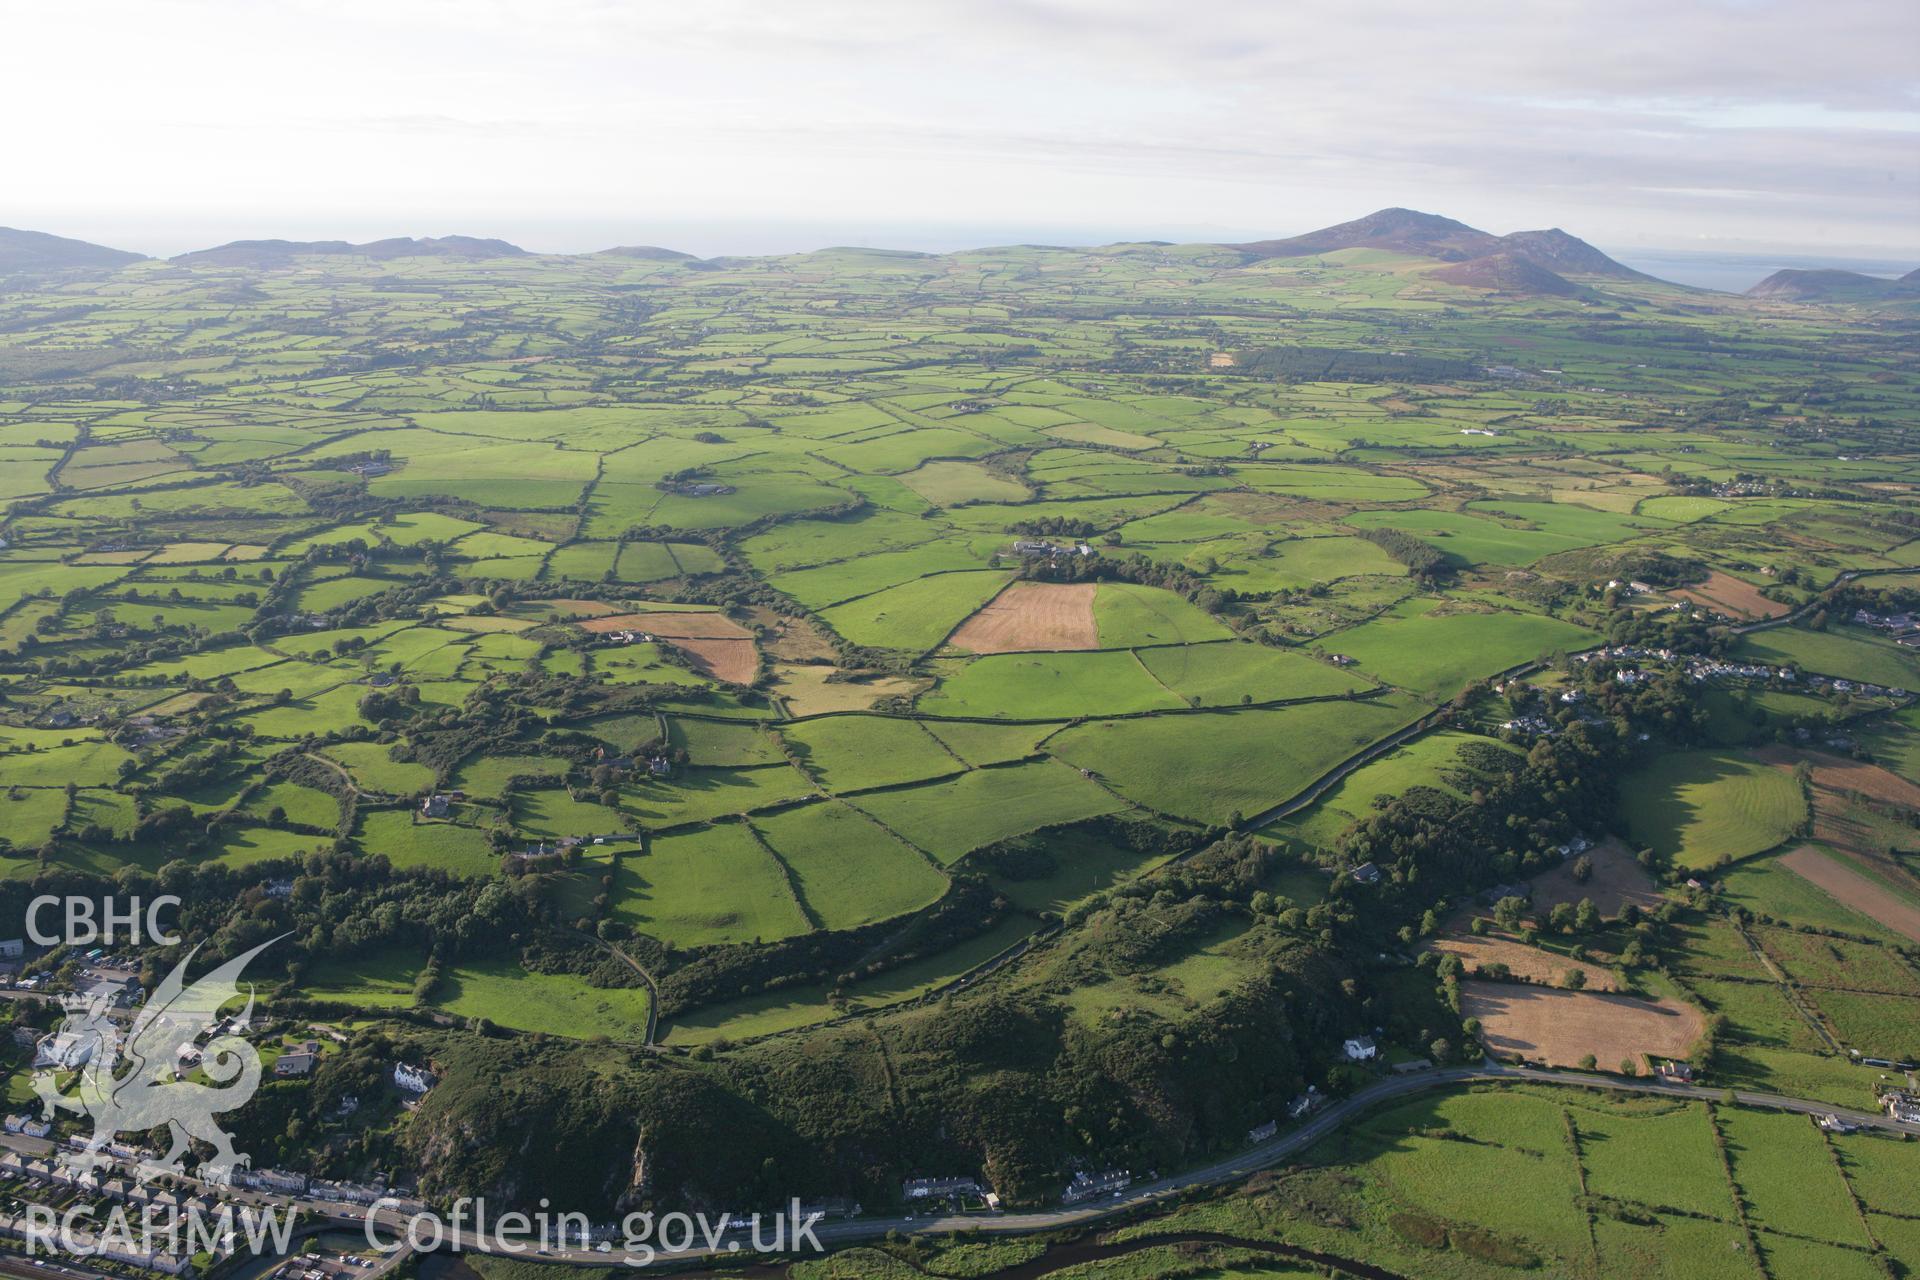 RCAHMW colour oblique aerial photograph of the landscape to the north of Pwllheli. Taken on 06 September 2007 by Toby Driver